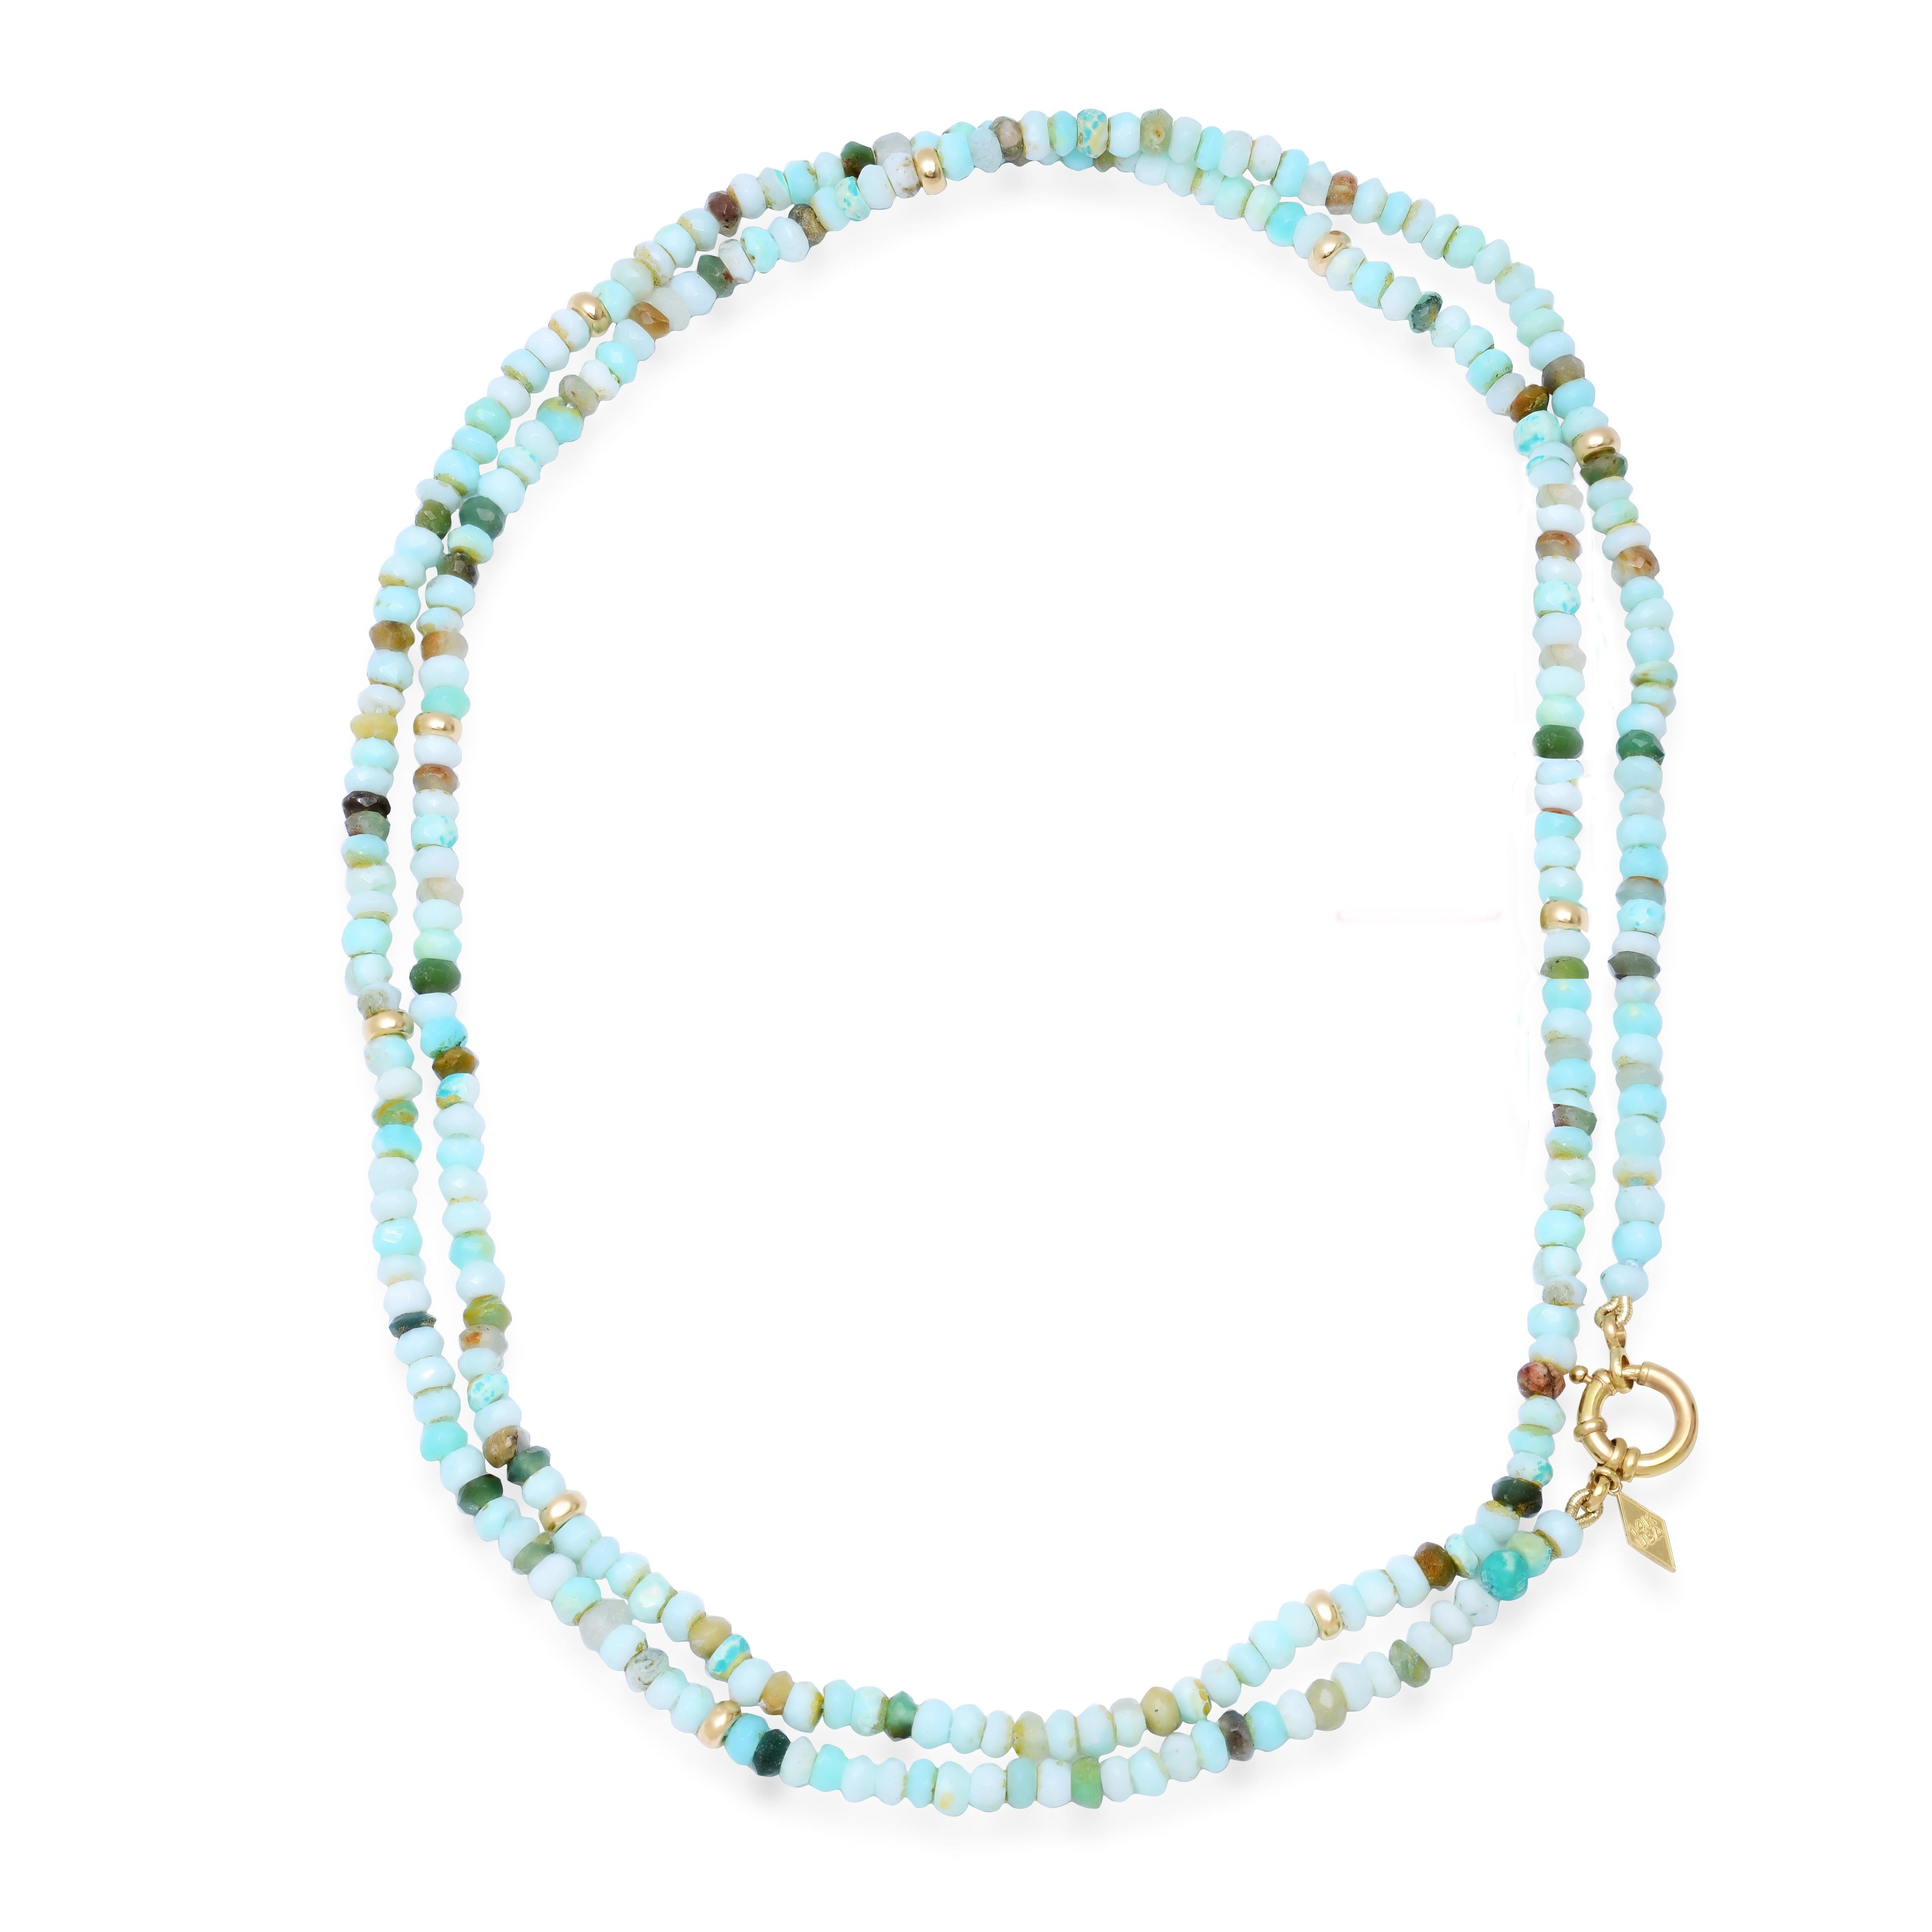 It's all about adding color ... and now we are adding some length too to our popular Chunky Gemstone Necklaces.  Peruvian Opal faceted rondelle stones with ten 14K Gold rondelle beads scattered throughout add the right pop of color with some gold